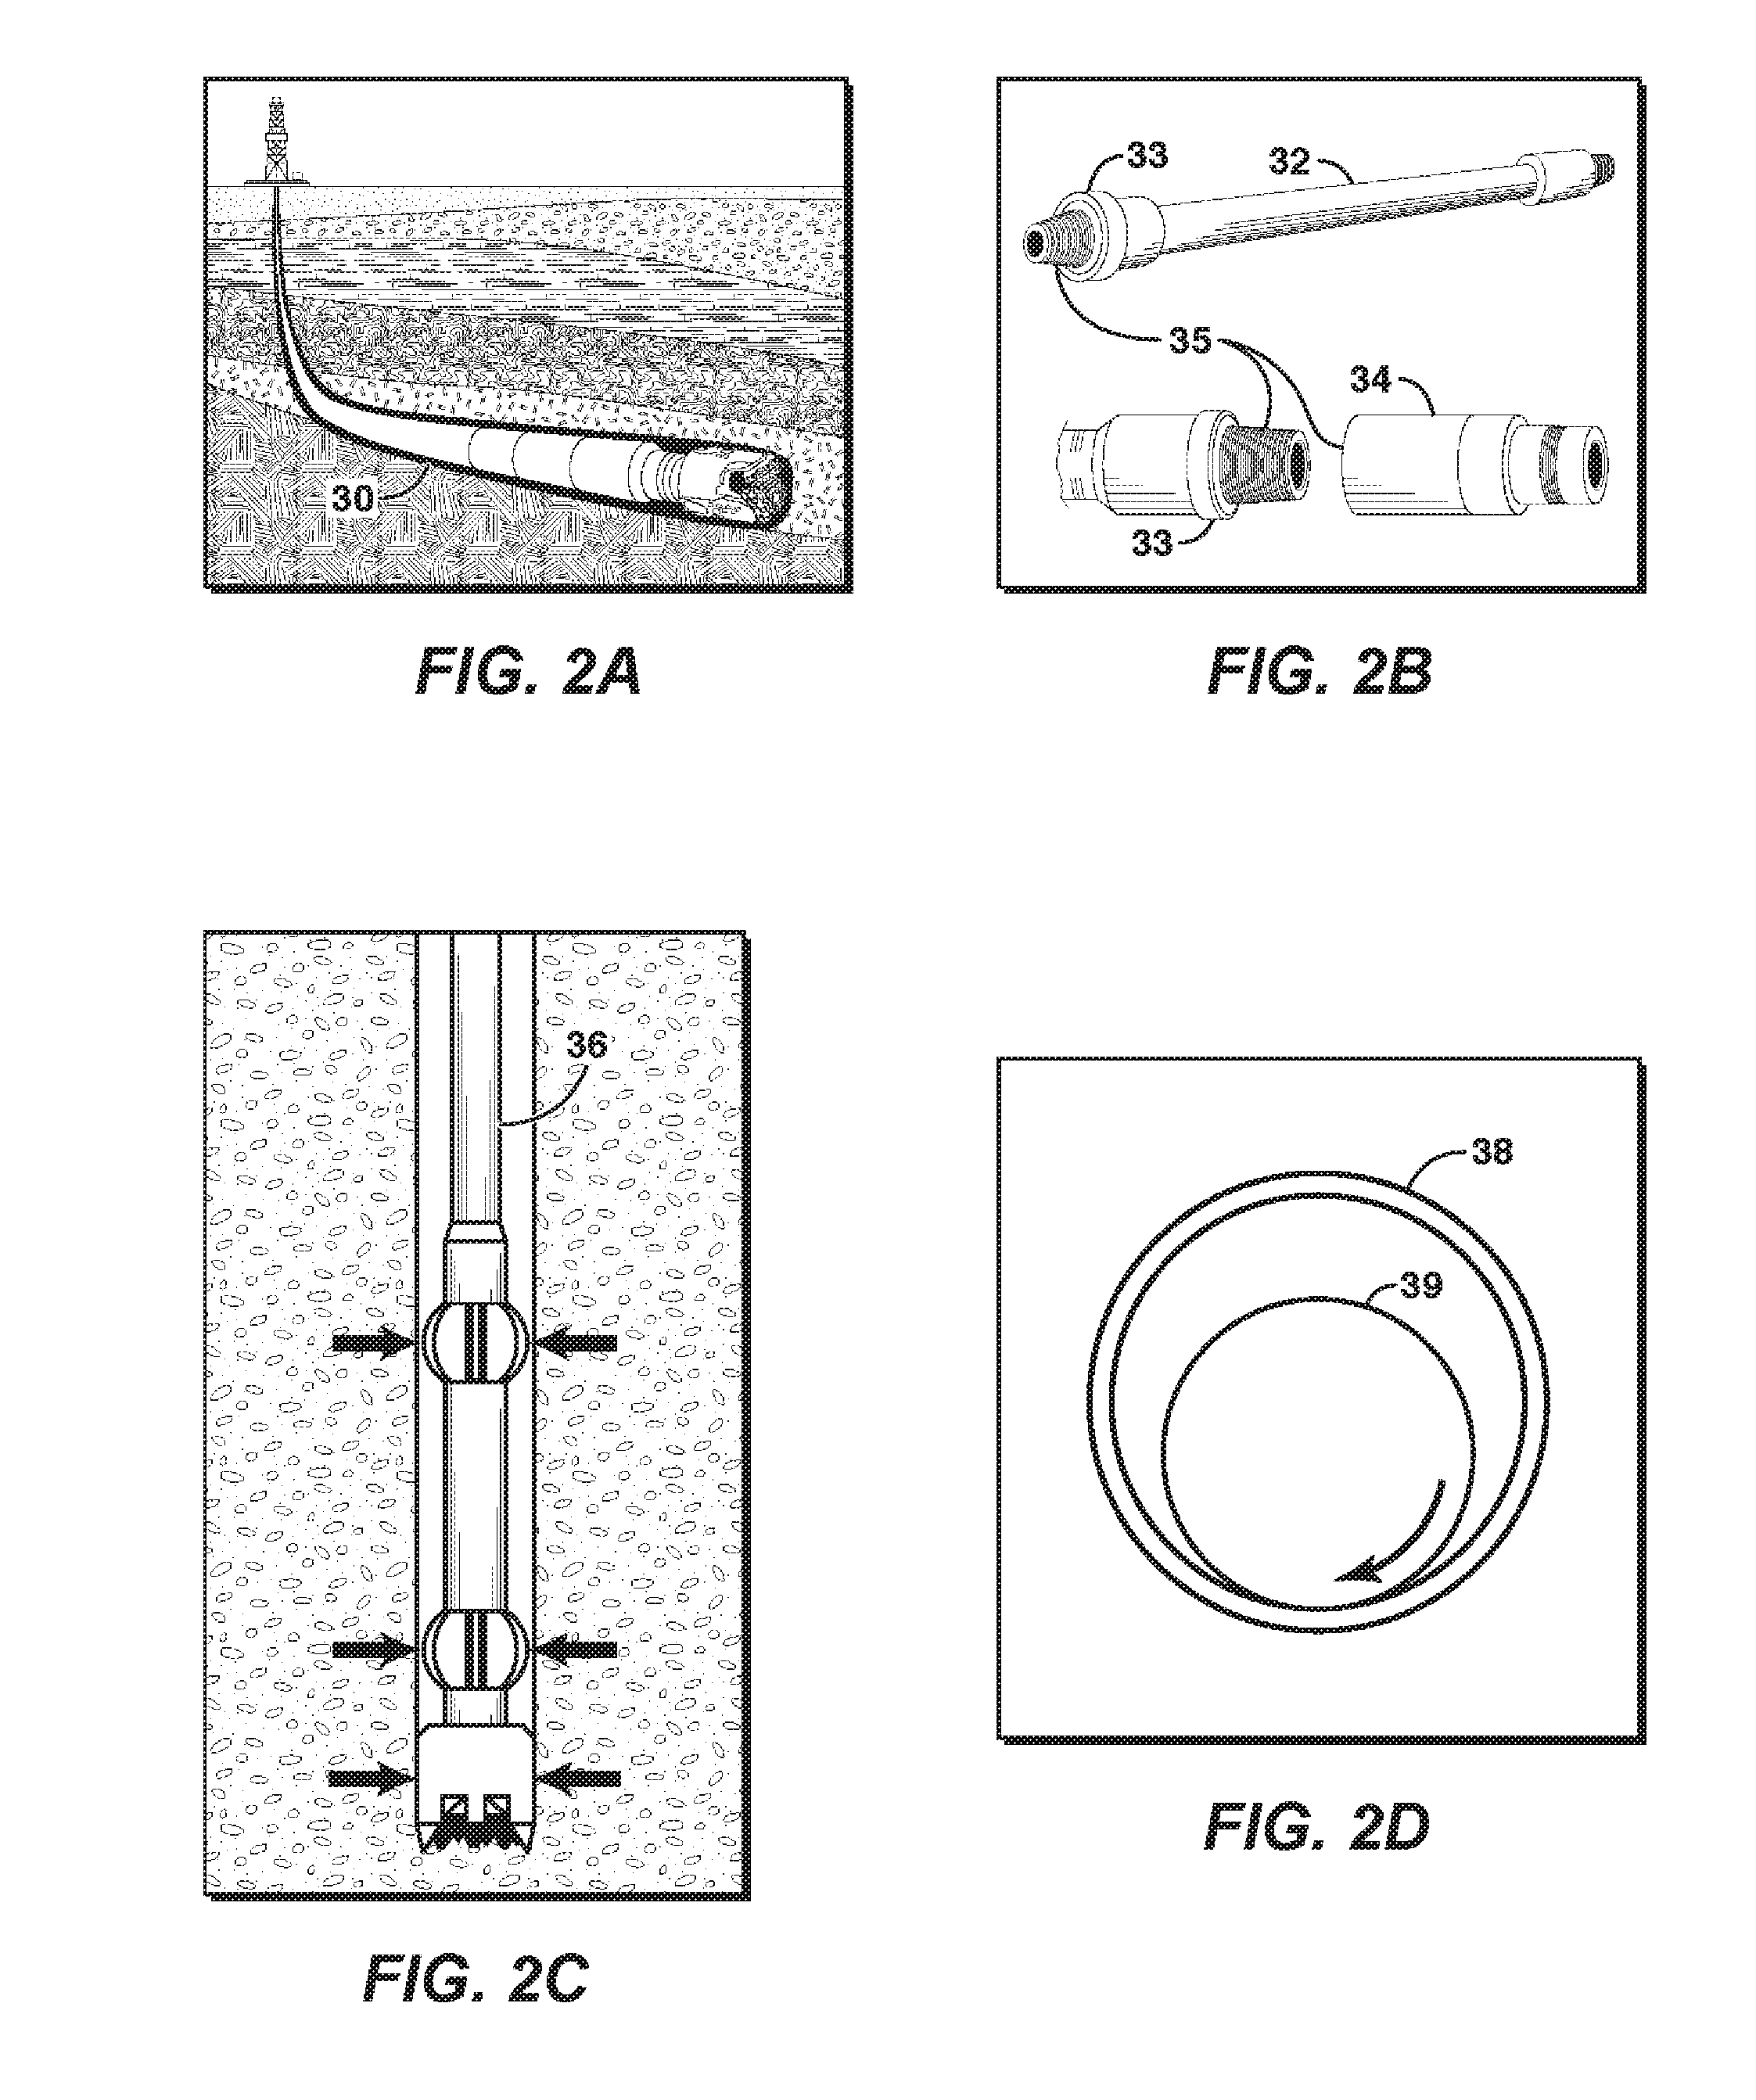 Coated sleeved oil and gas well production devices